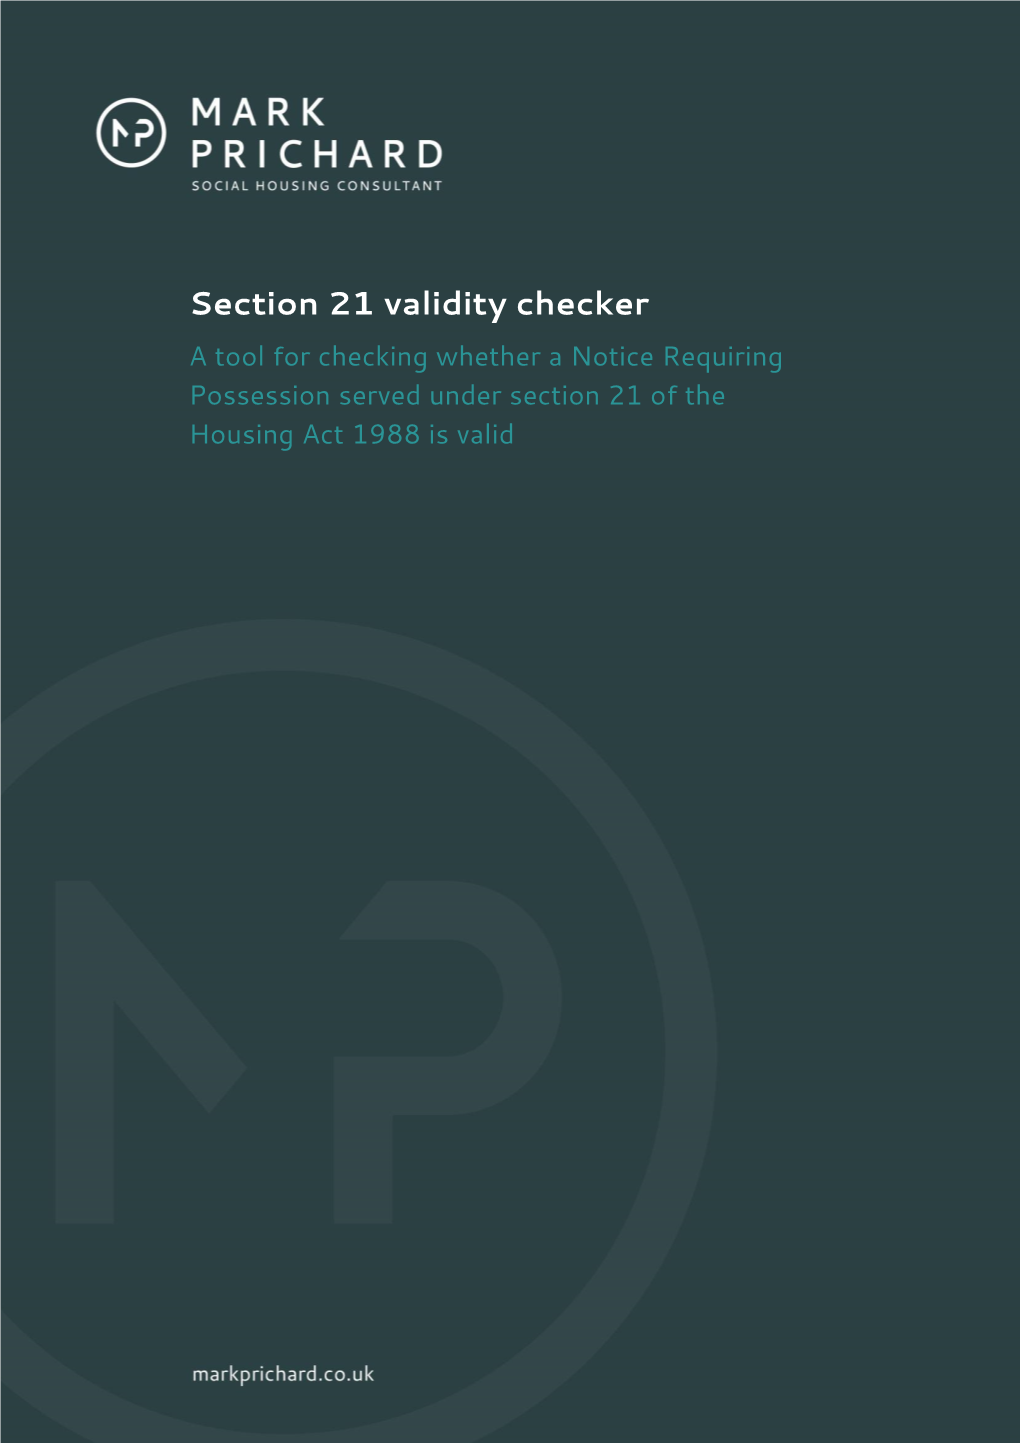 Section 21 Validity Checker